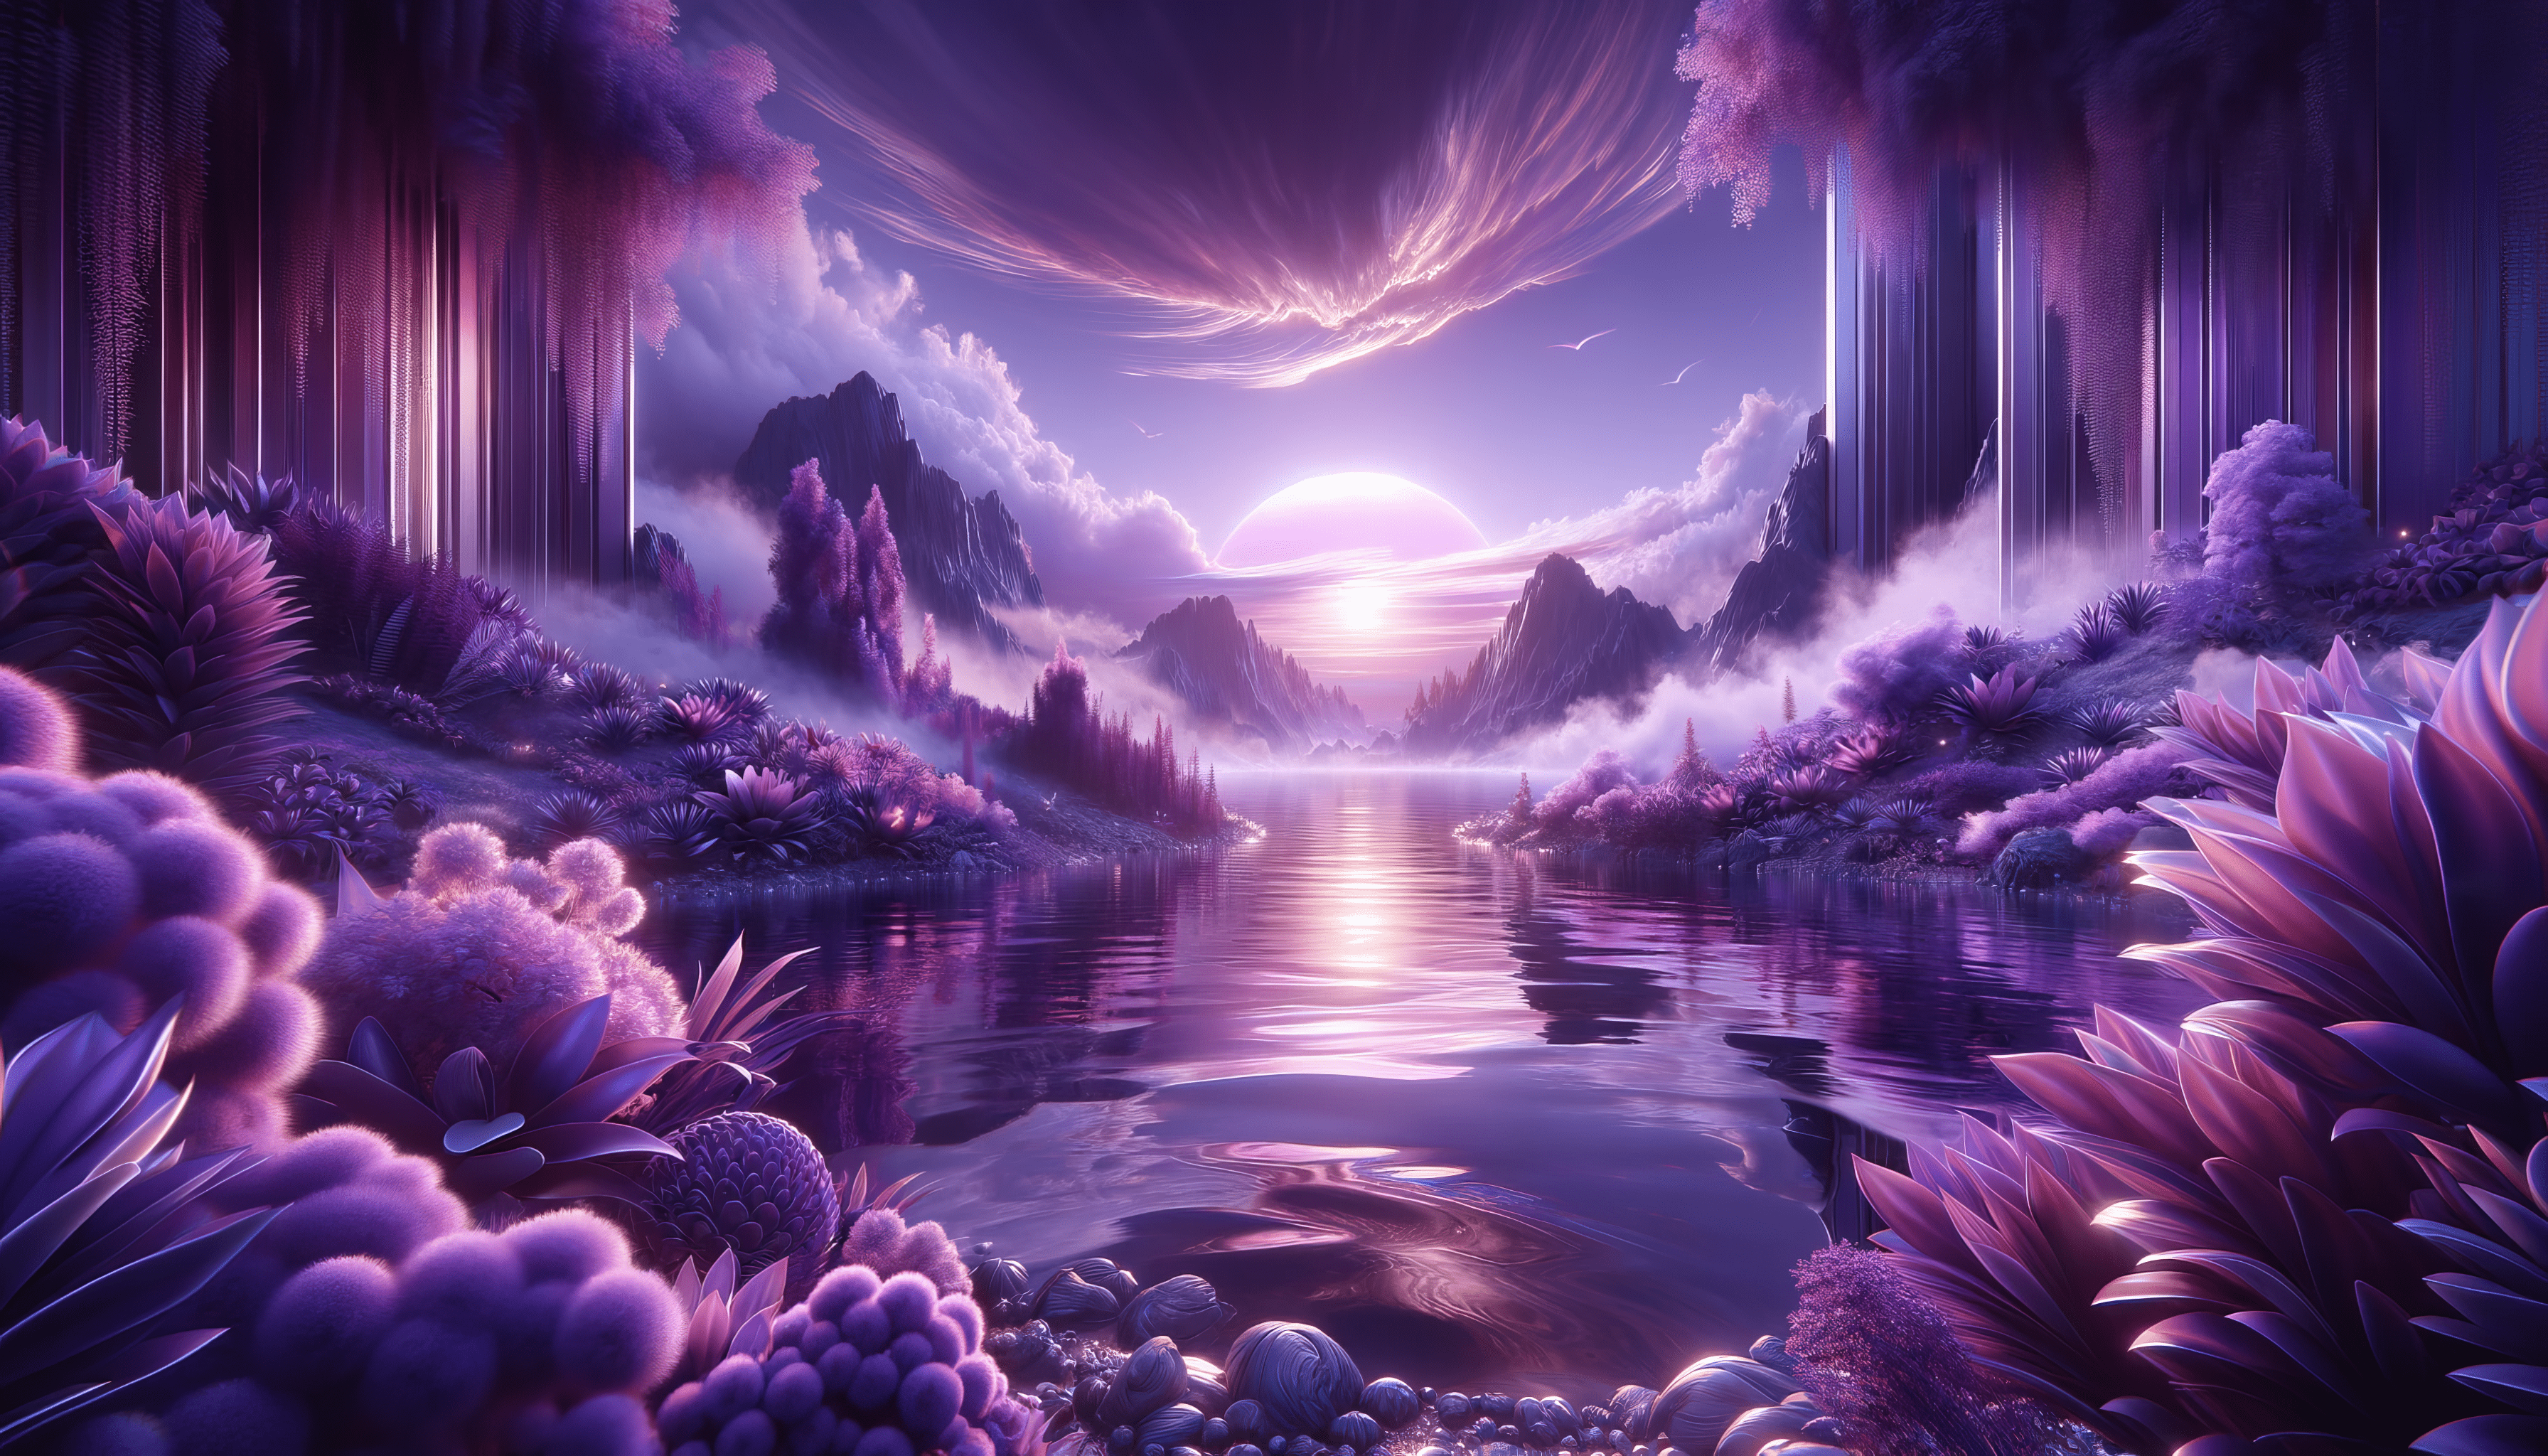 A purple and pink sunset over a lake surrounded by mountains - Purple